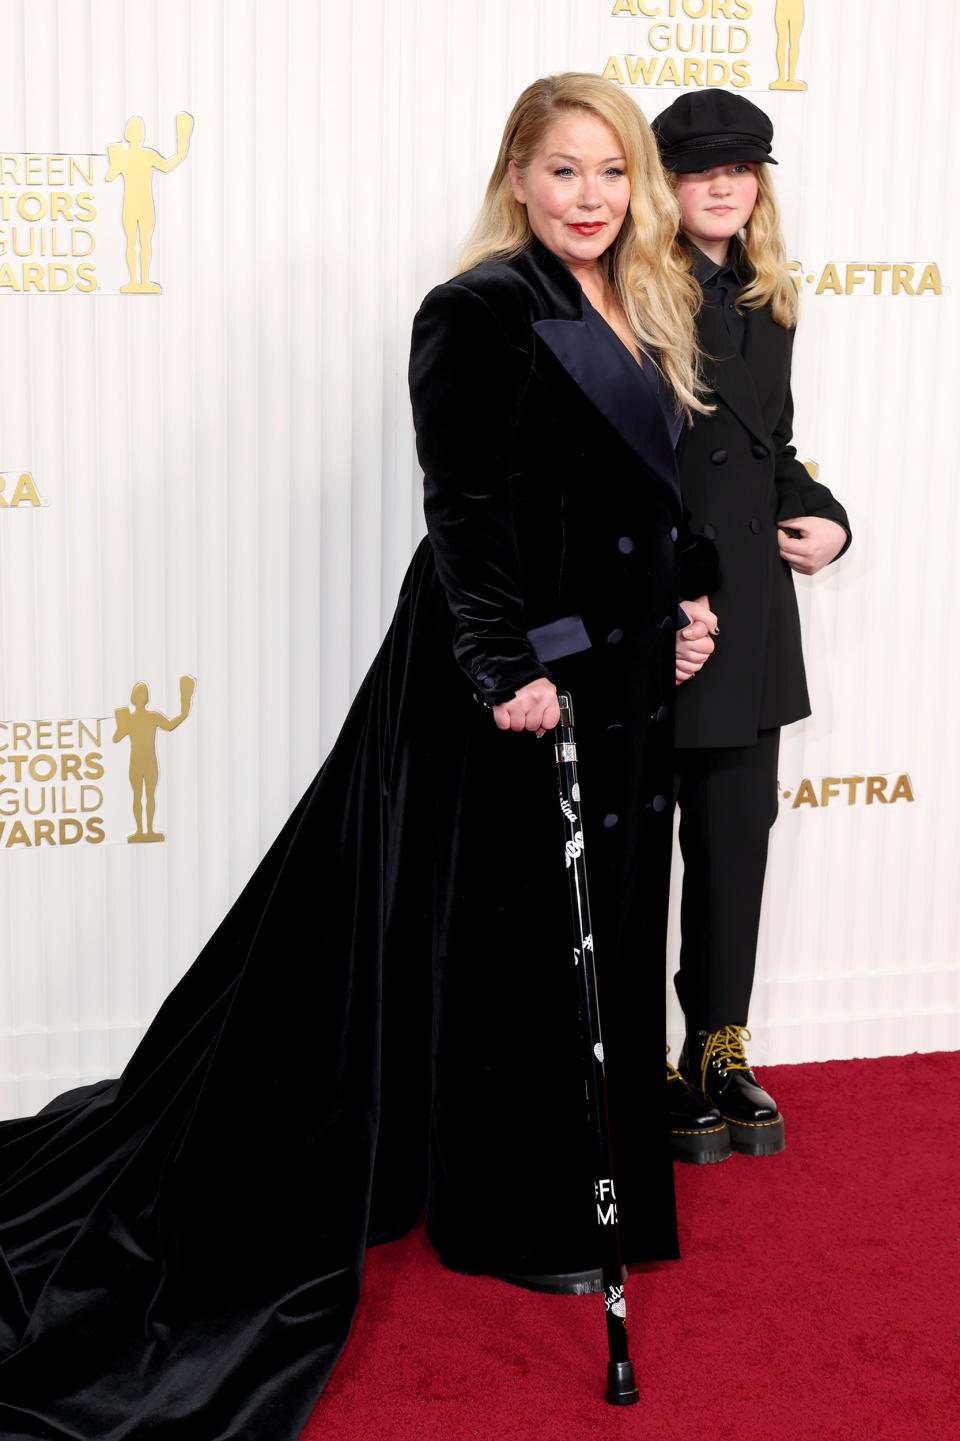 Shemale Christina Applegate Nude - Christina Applegate matches her daughter and carries cane referencing MS at  SAG Awards